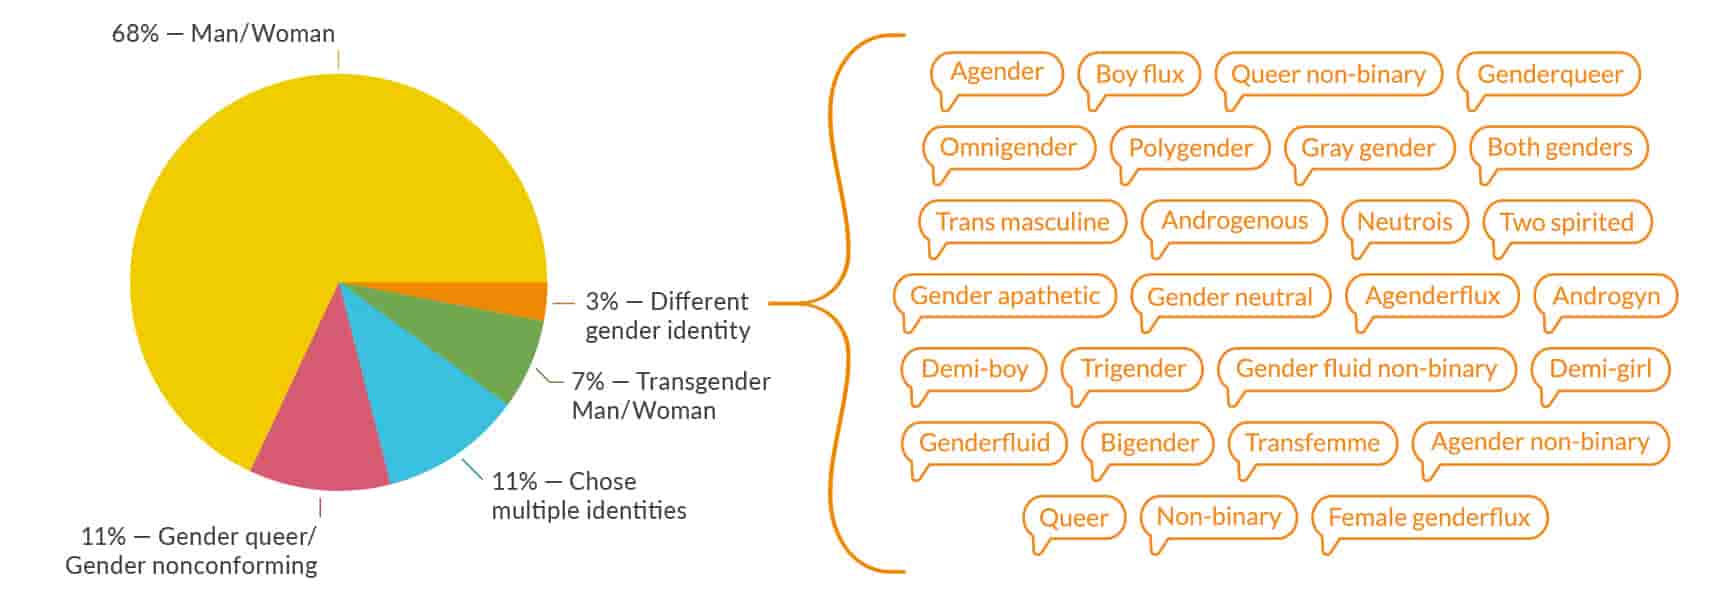 Transgender meaning binary non What Does